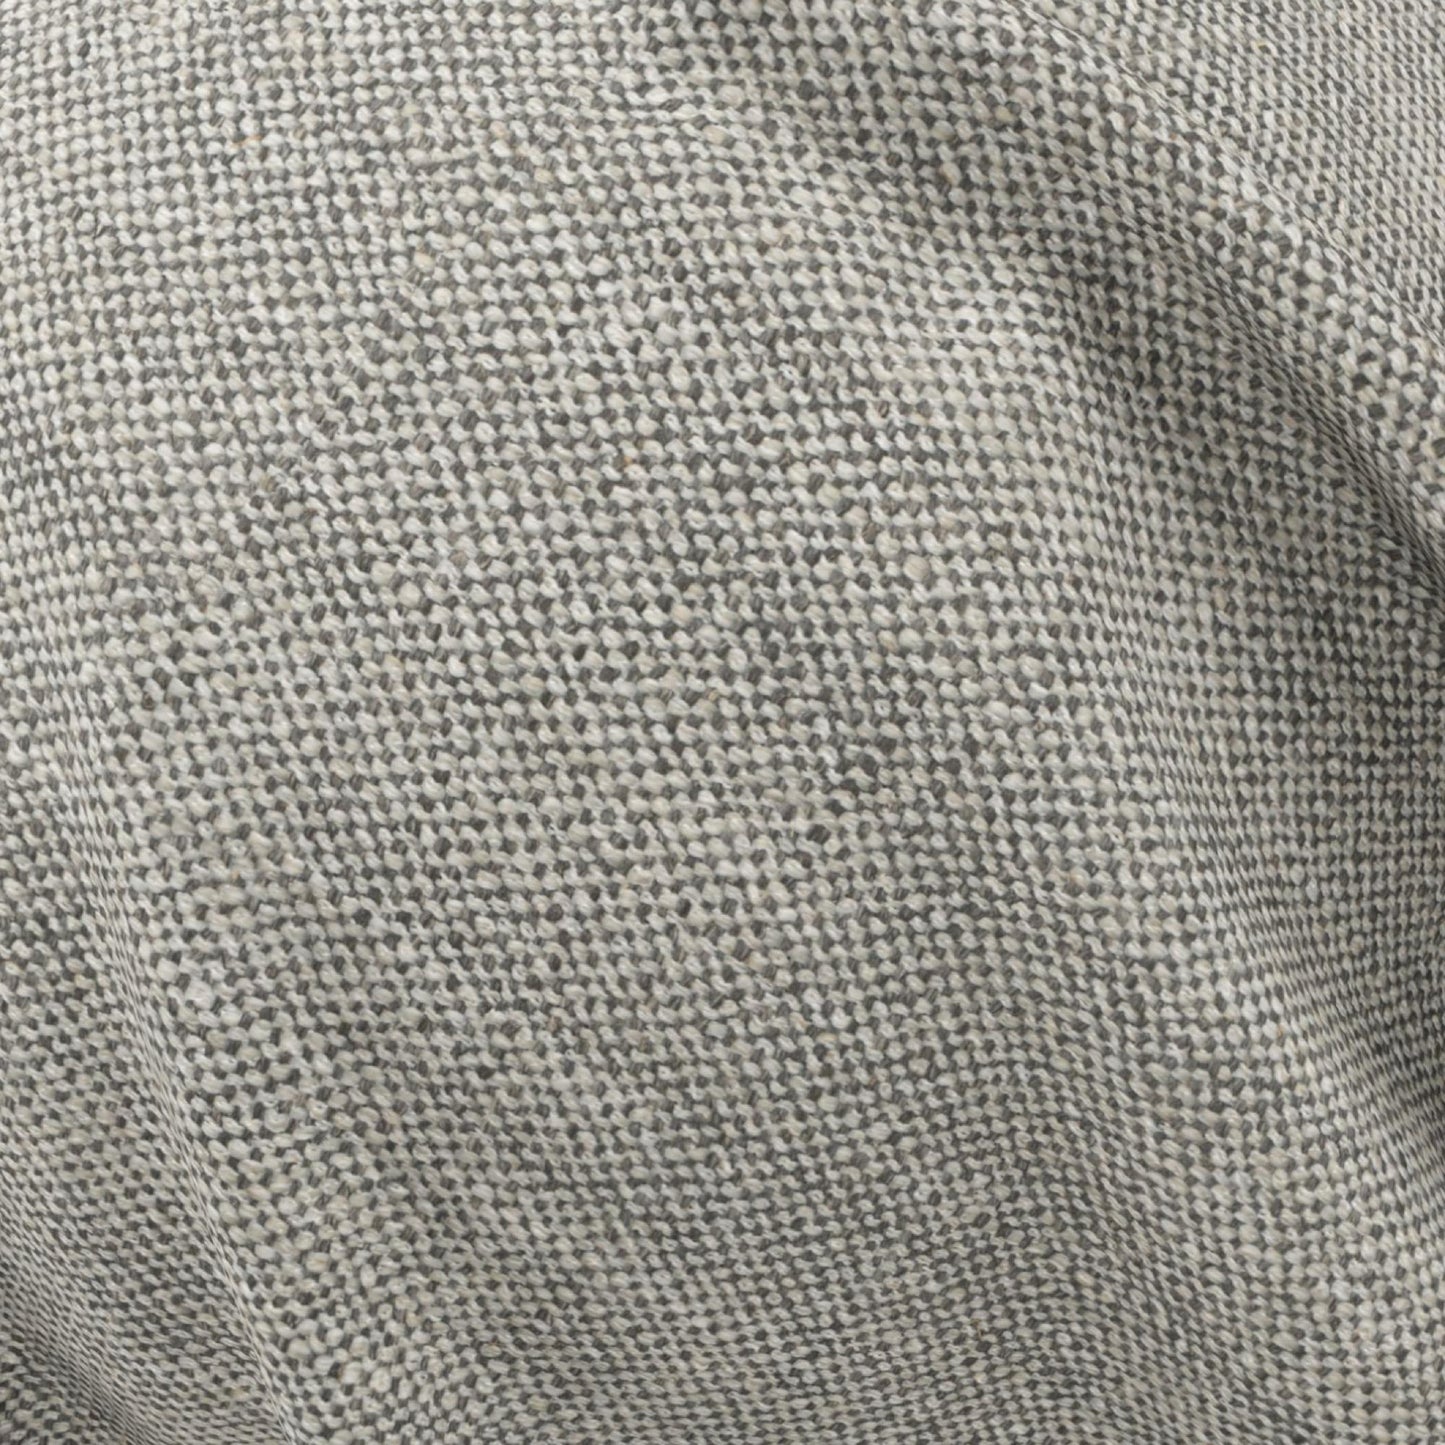 WEAVE WOOL FABRIC SAMPLE | MID RANGE COLLECTION